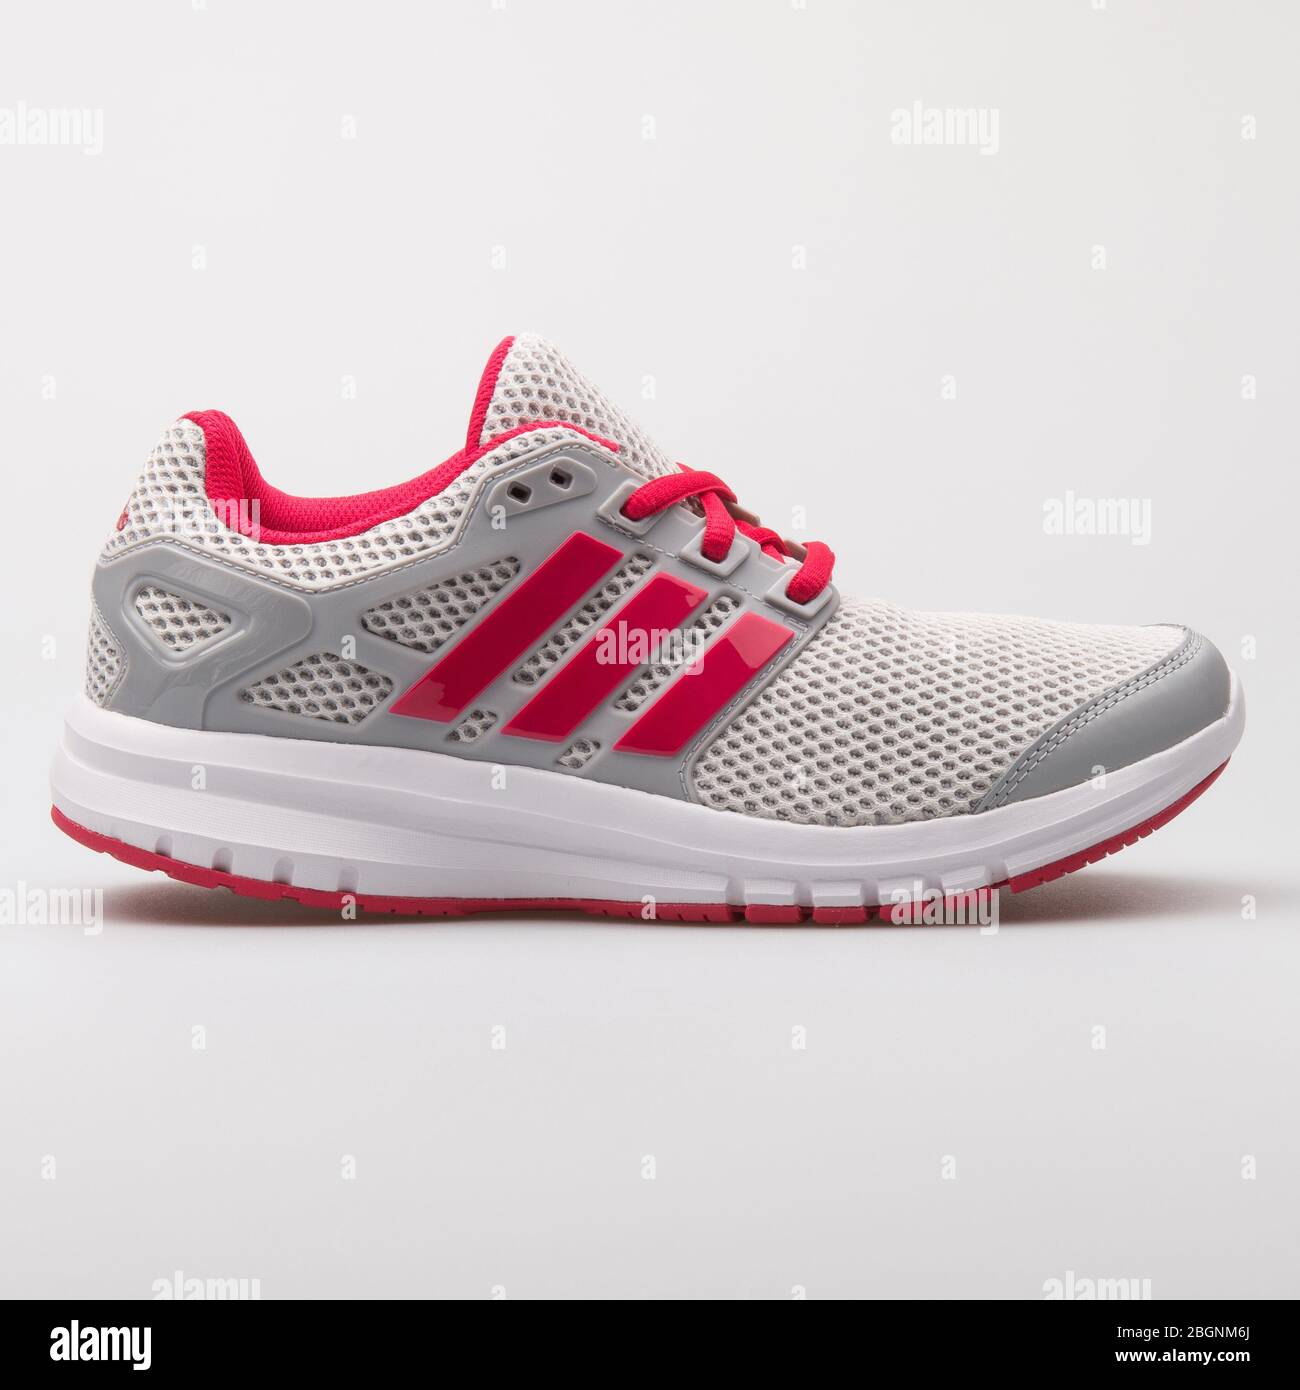 adidas energy cloud red